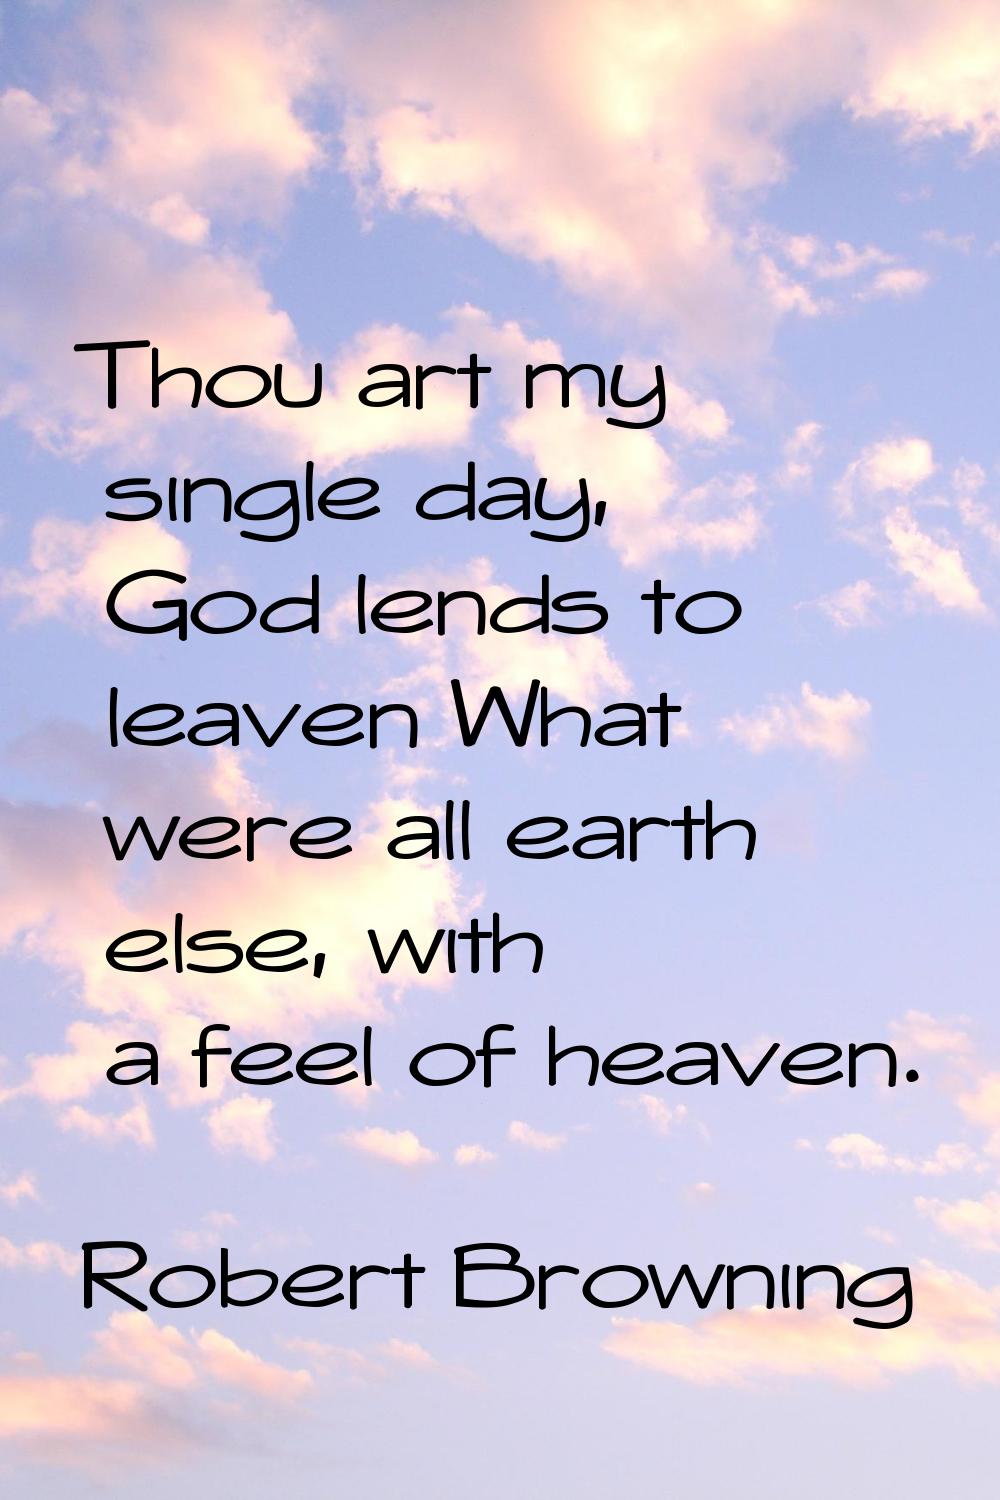 Thou art my single day, God lends to leaven What were all earth else, with a feel of heaven.